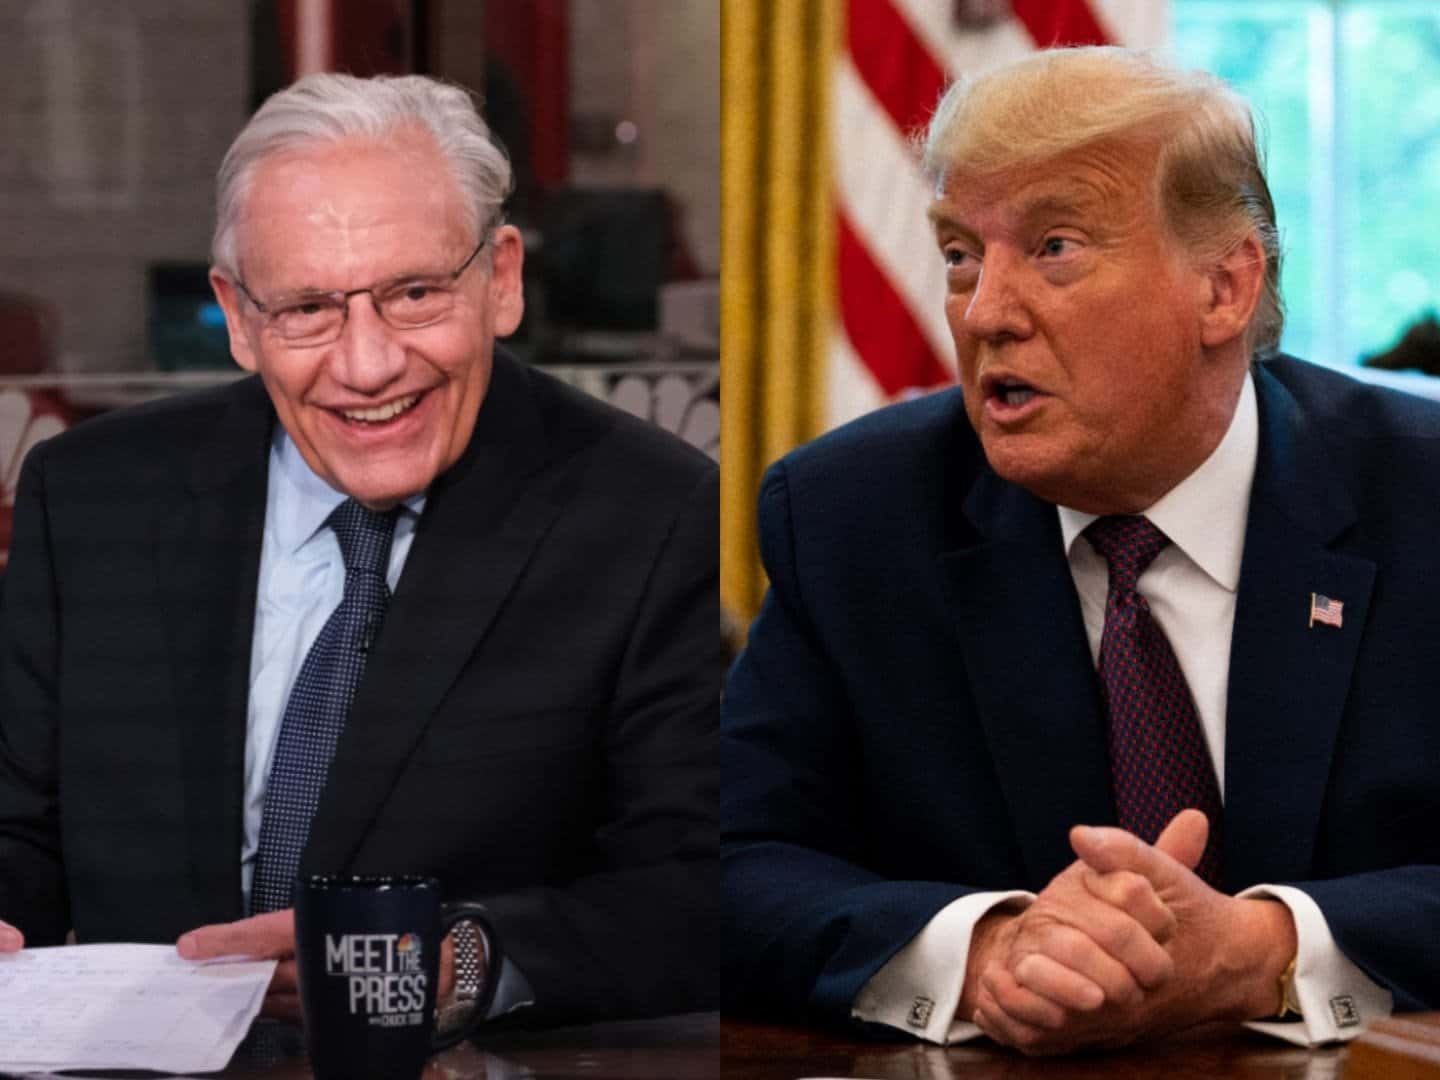 Trump Lawsuit: Bob Woodward Concealed *Key* Parts of Months Long Interviews With President Trump – Here Are the Redactions Woodward Deceptively Deleted from the Audio